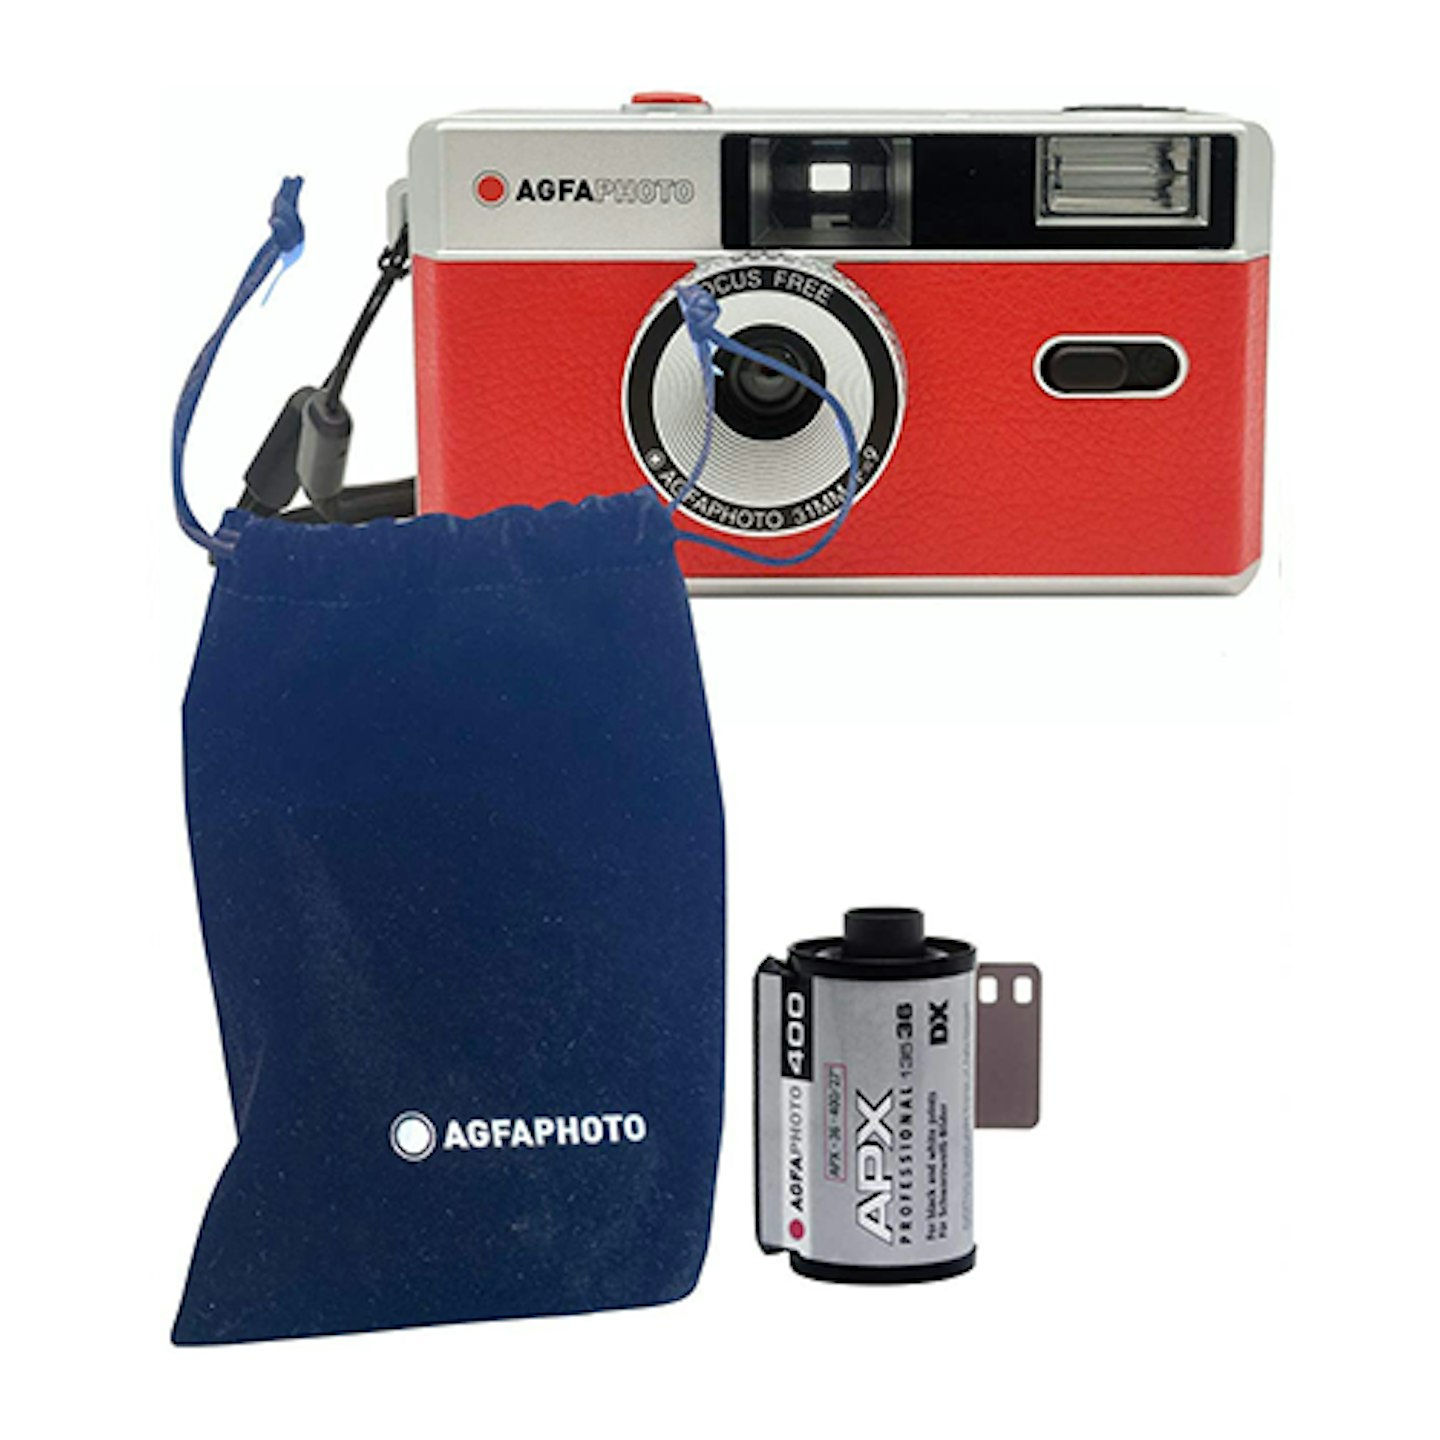 AgfaPhoto AG603001B Analogue 35 mm Small Picture Camera Red in Set with Black/White Film + Battery for up to 36 Pictures